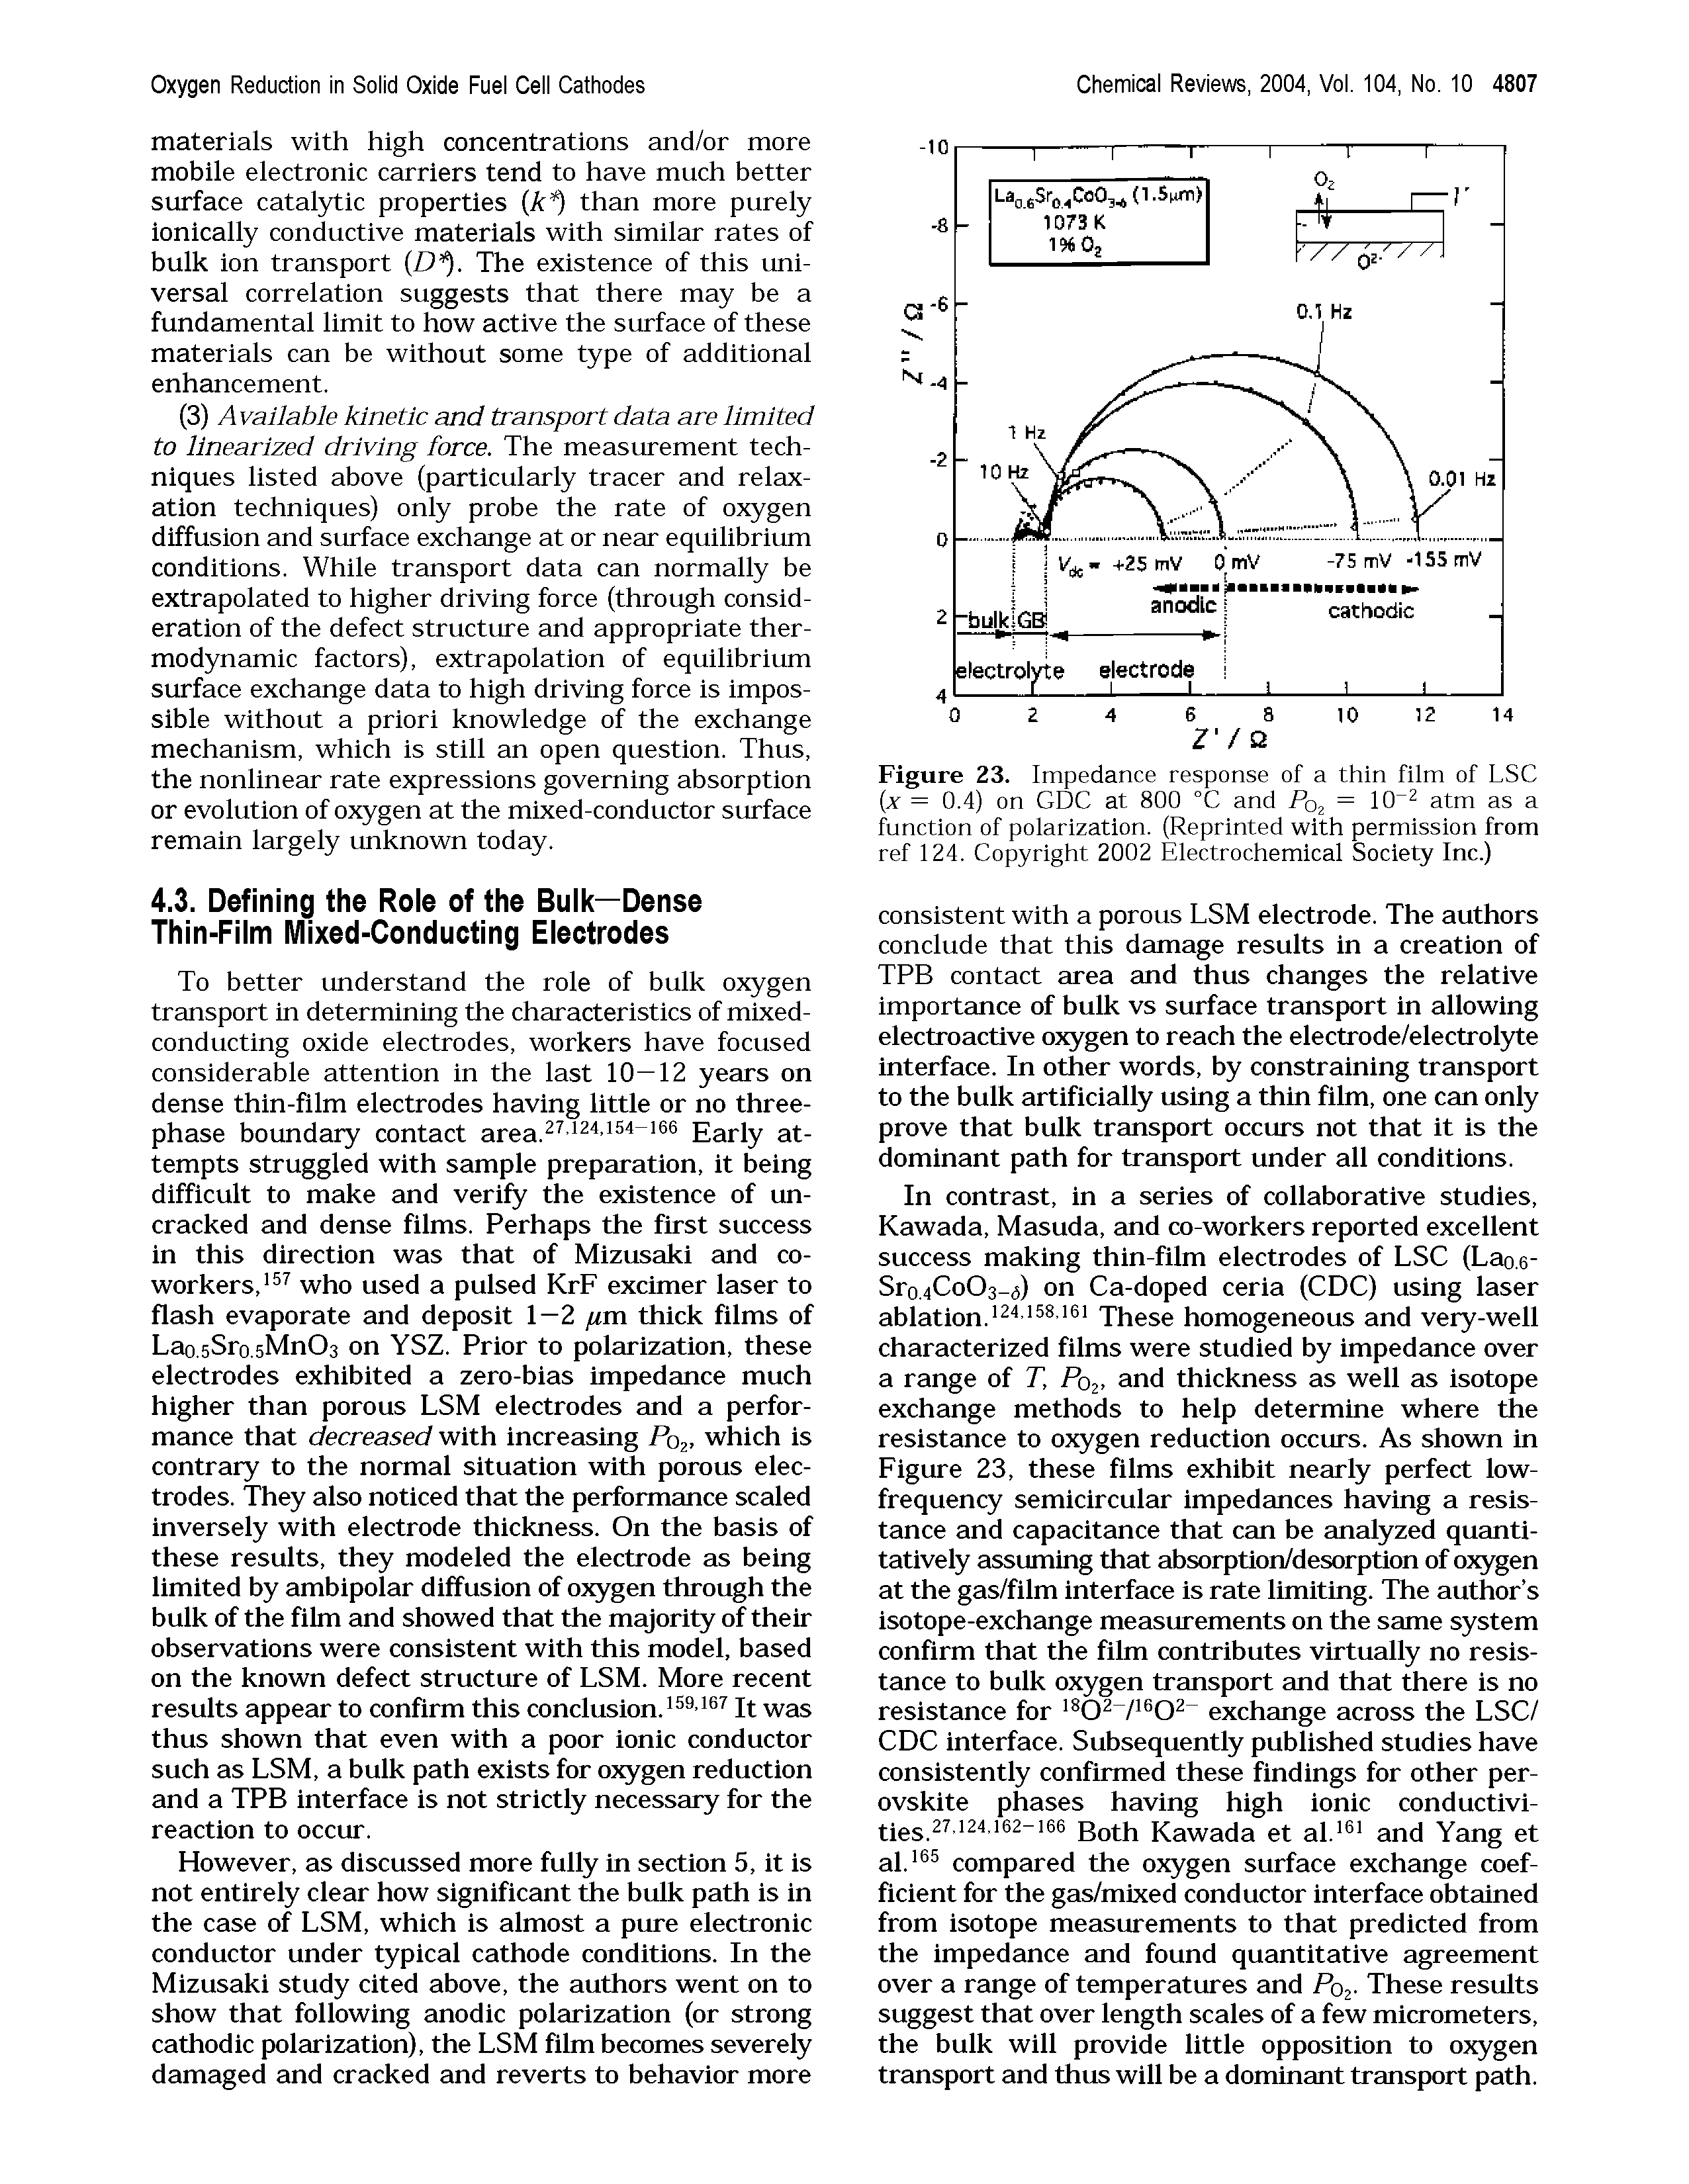 Figure 23. Impedance response of a thin film of LSC (x = 0.4) on GDC at 800 °C and Pq = 10 gxm as a function of polarization. (Reprinted with permission from ref 124. Copyright 2002 Electrochemical Society Inc.)...